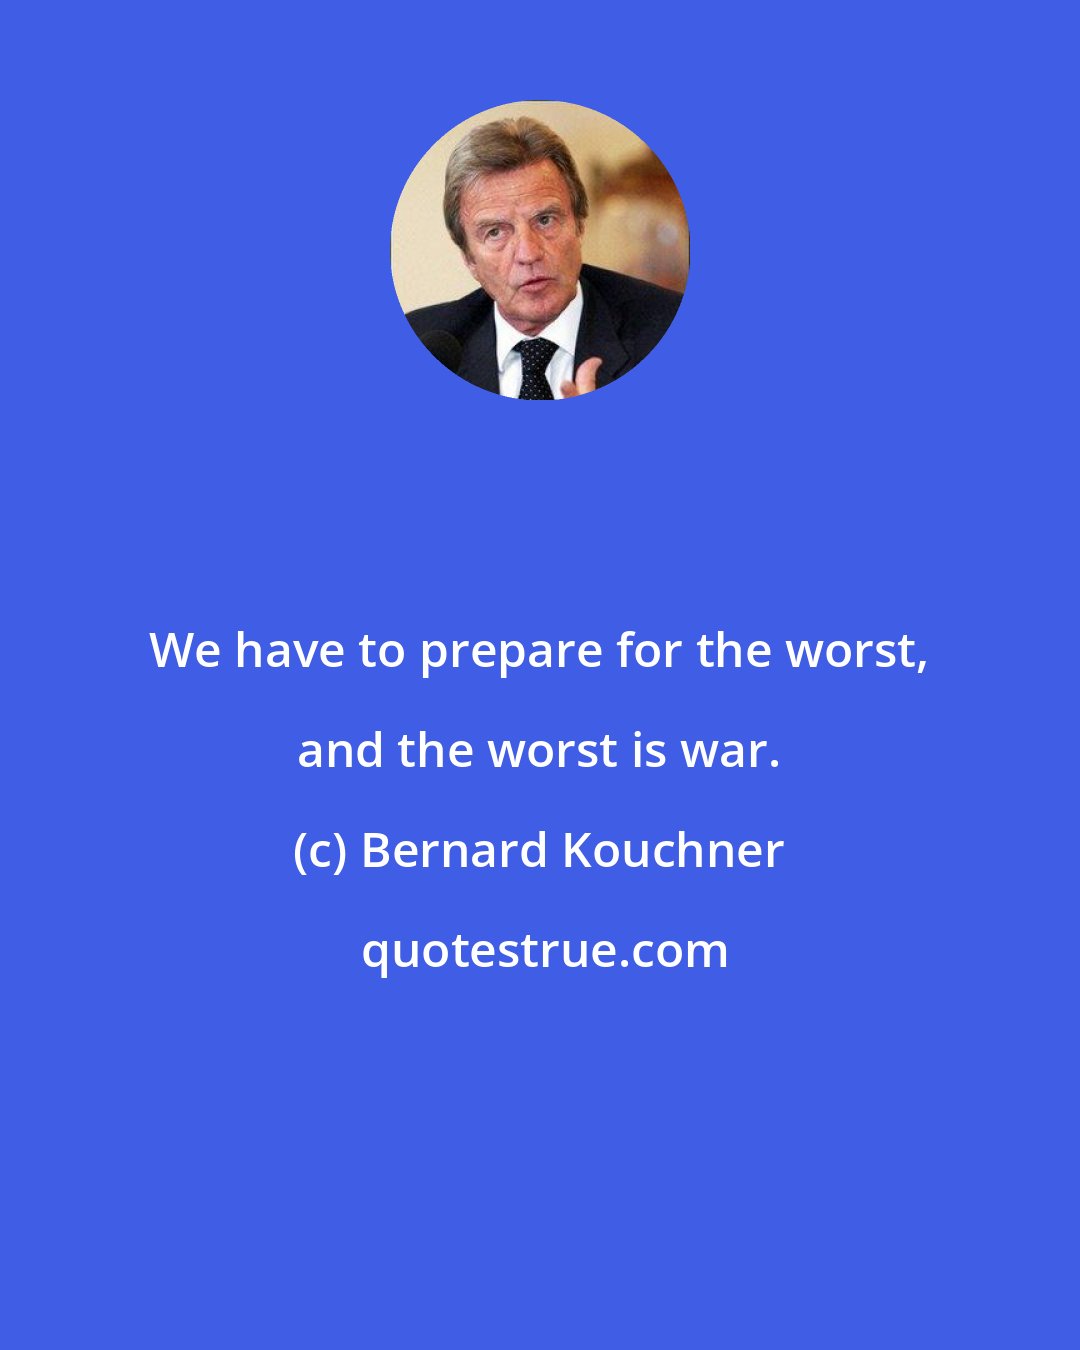 Bernard Kouchner: We have to prepare for the worst, and the worst is war.